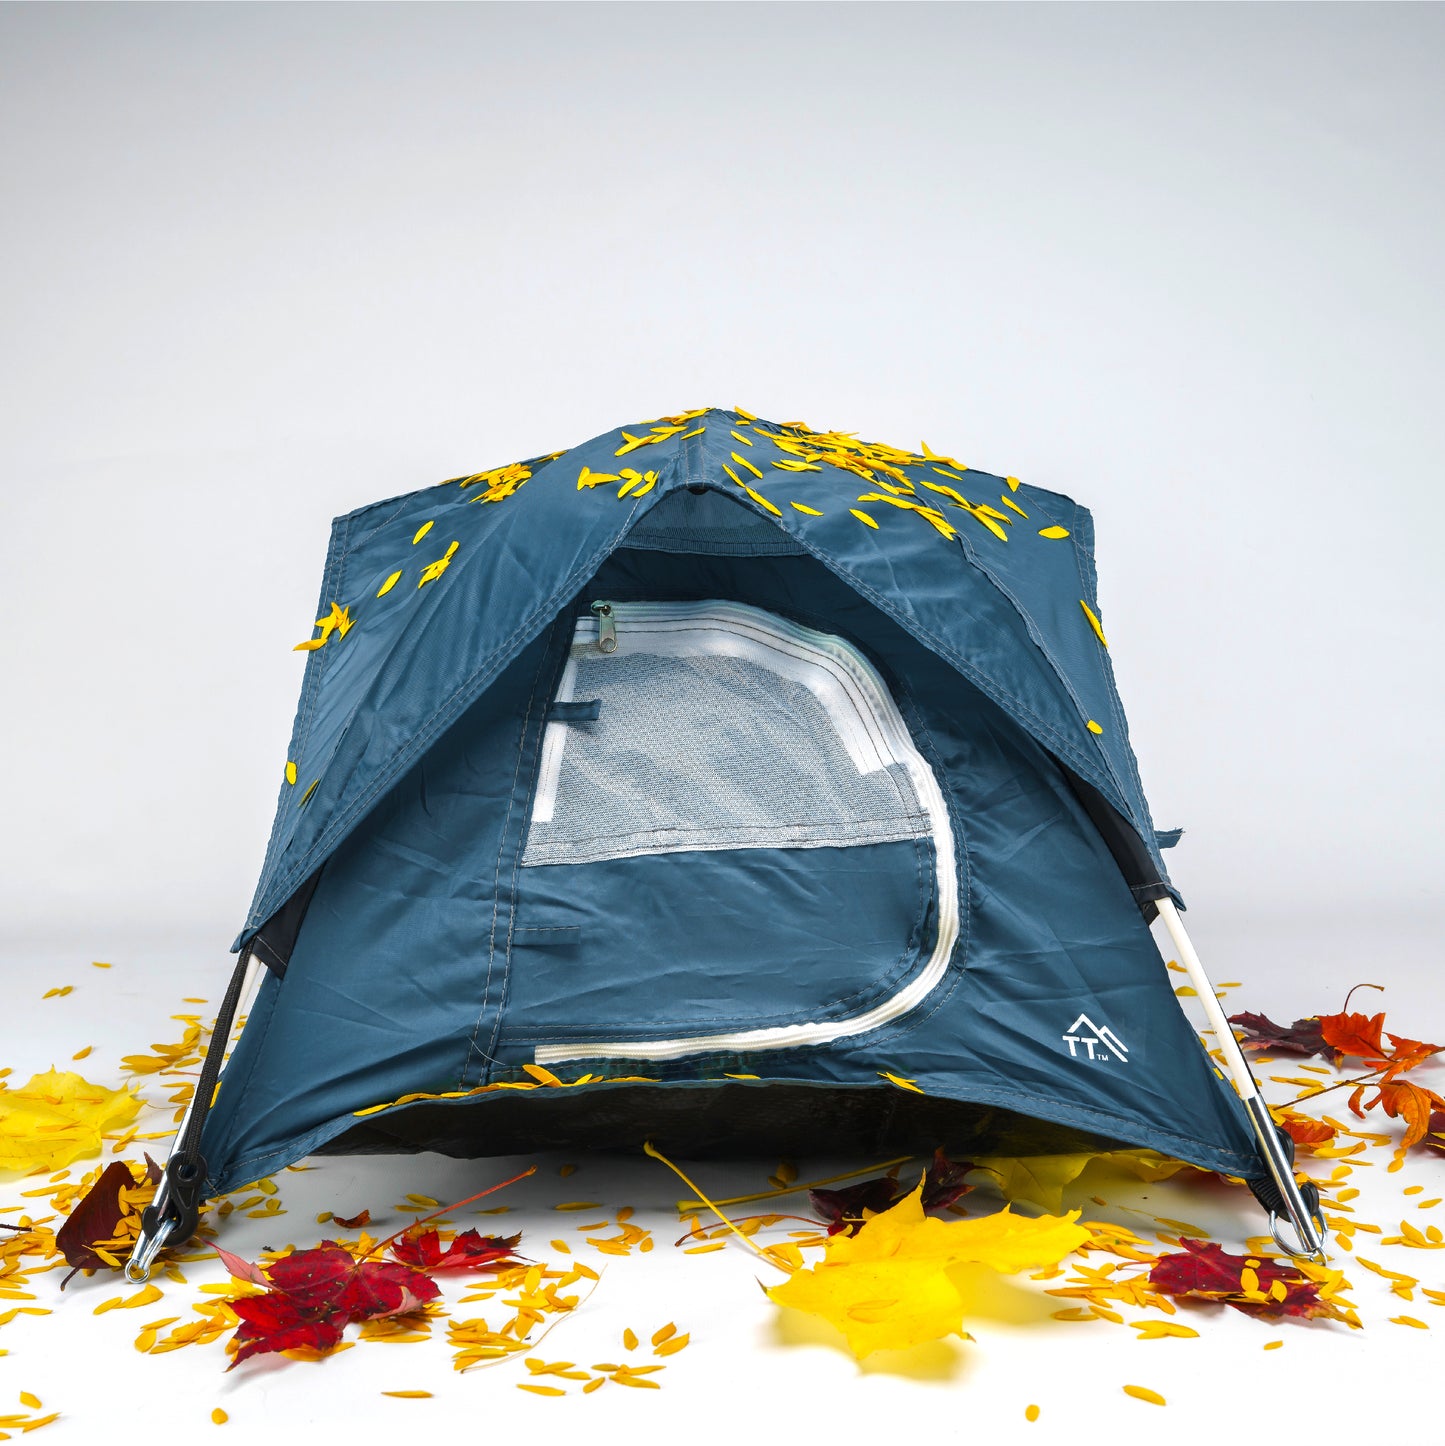 blue tiny tent on white background with colorful fall leaves on the ground